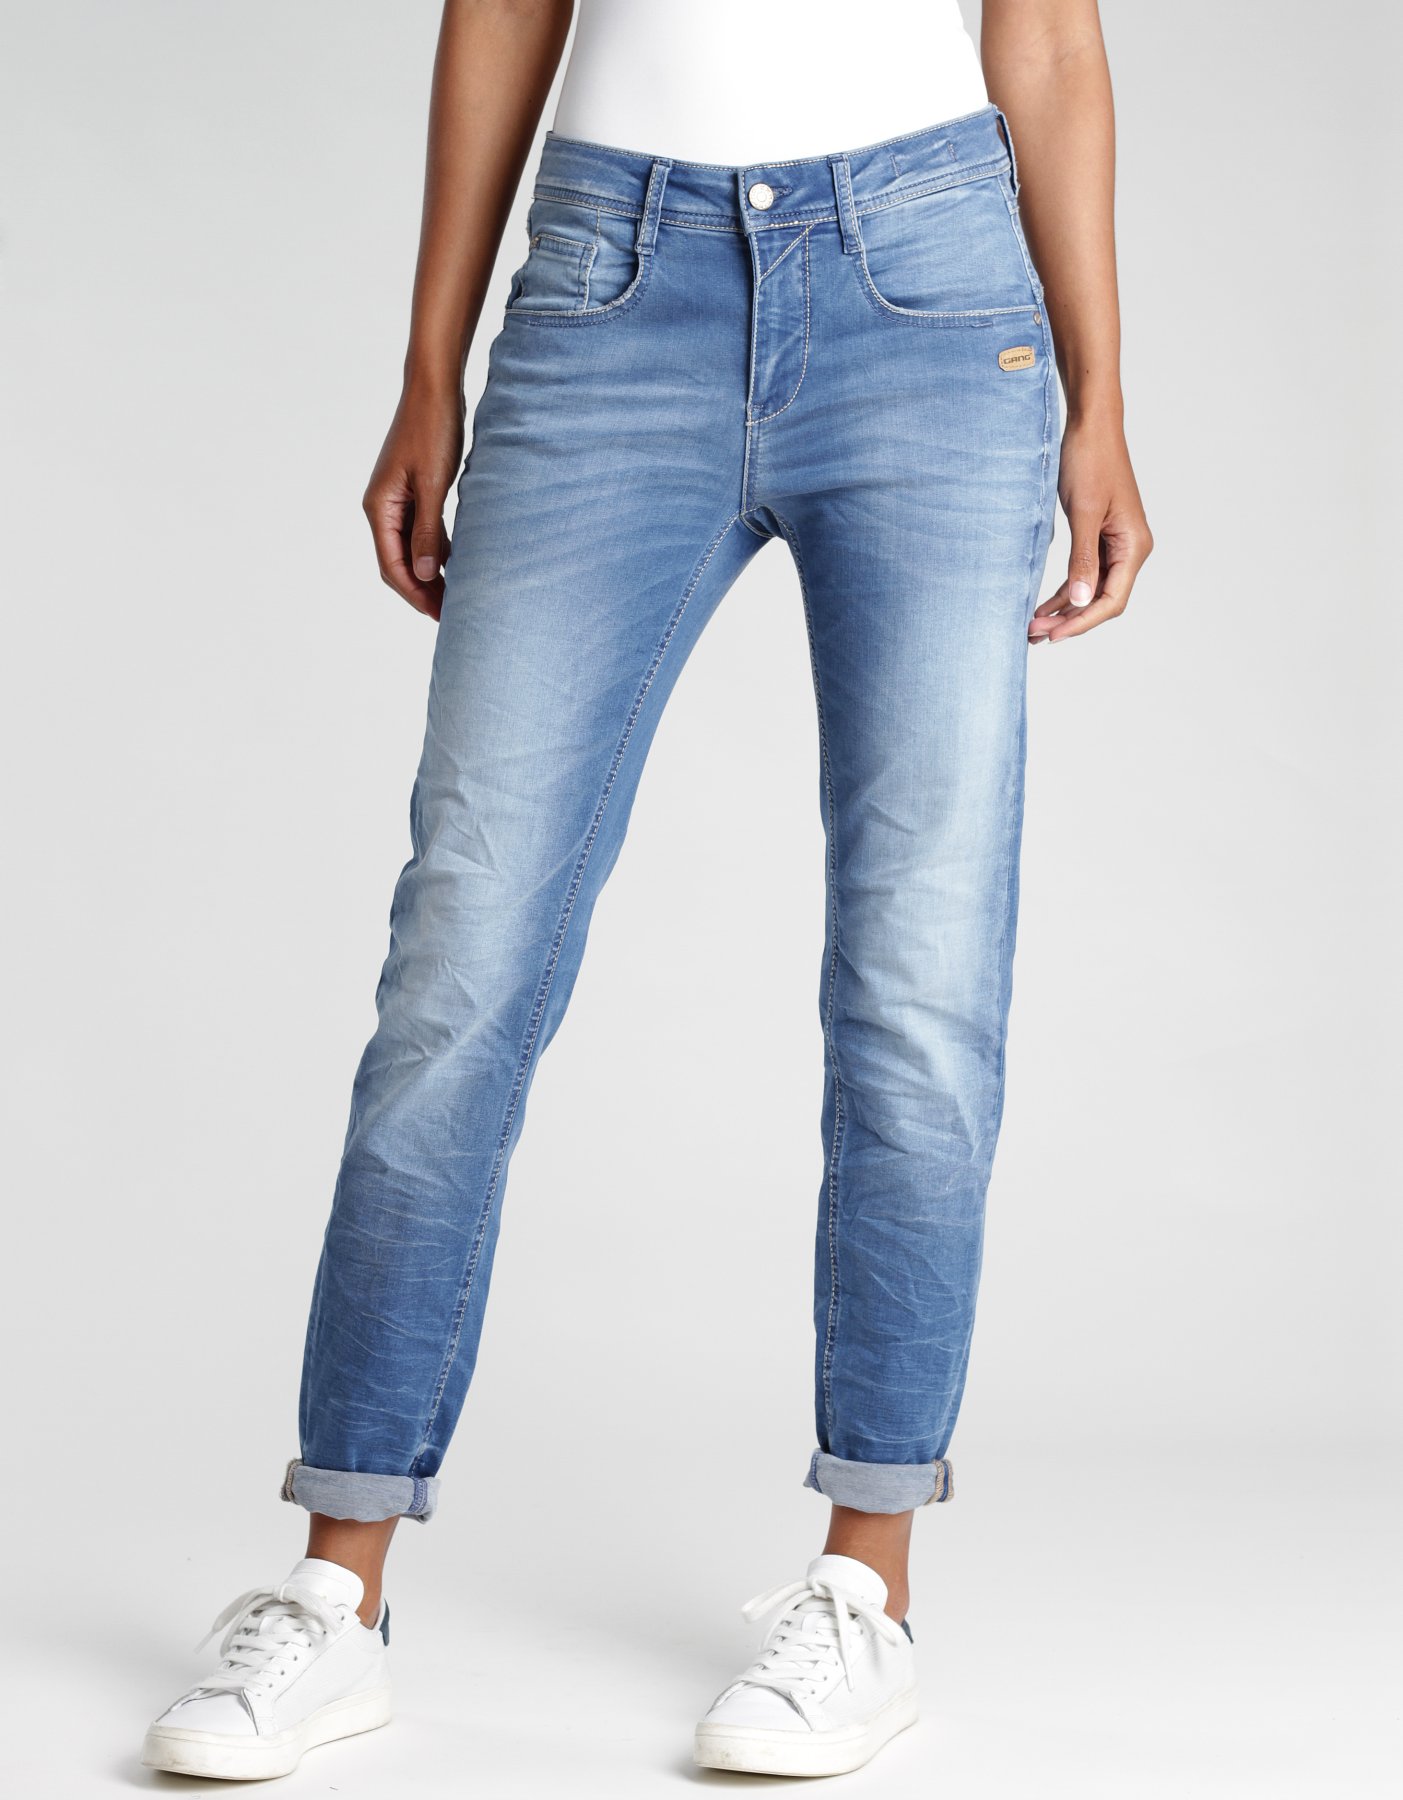 DAMEN | 94AMELIE FIT JEANS GANG VINTAGE TRULY Jeans | Engelheym CROPPED-RELAXED Hosen | DOWN